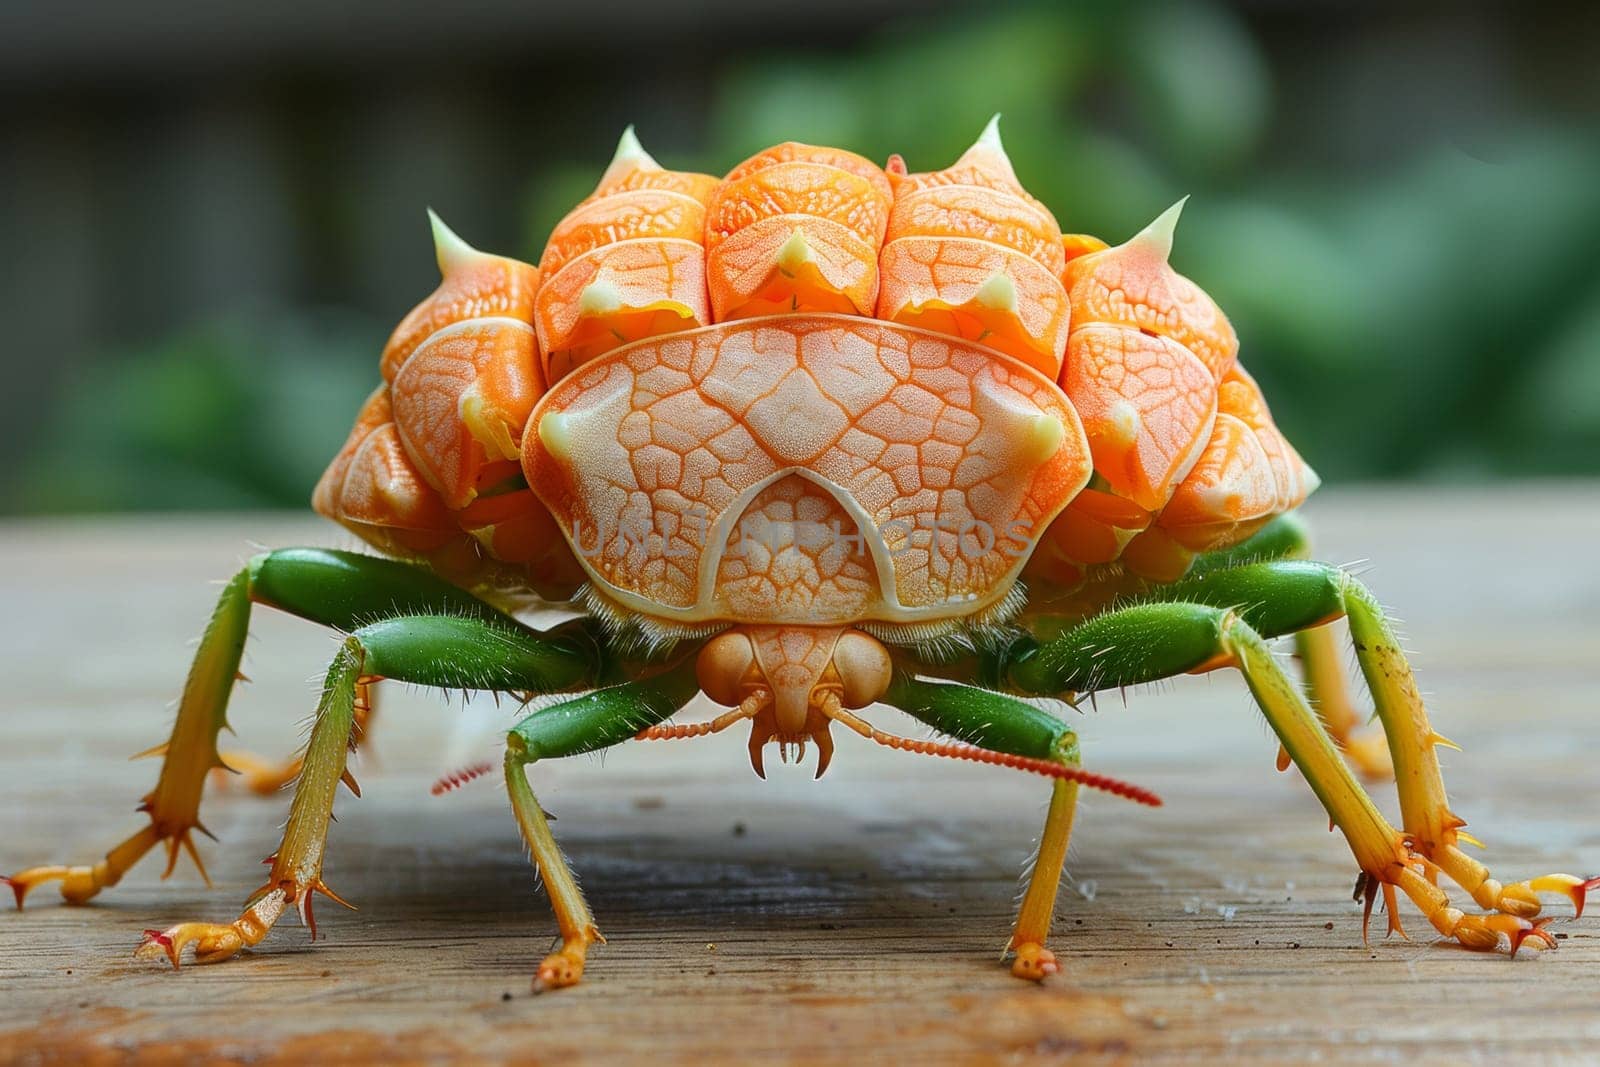 A close up of a fictional bug with orange and green spikes on its back, AI by starush